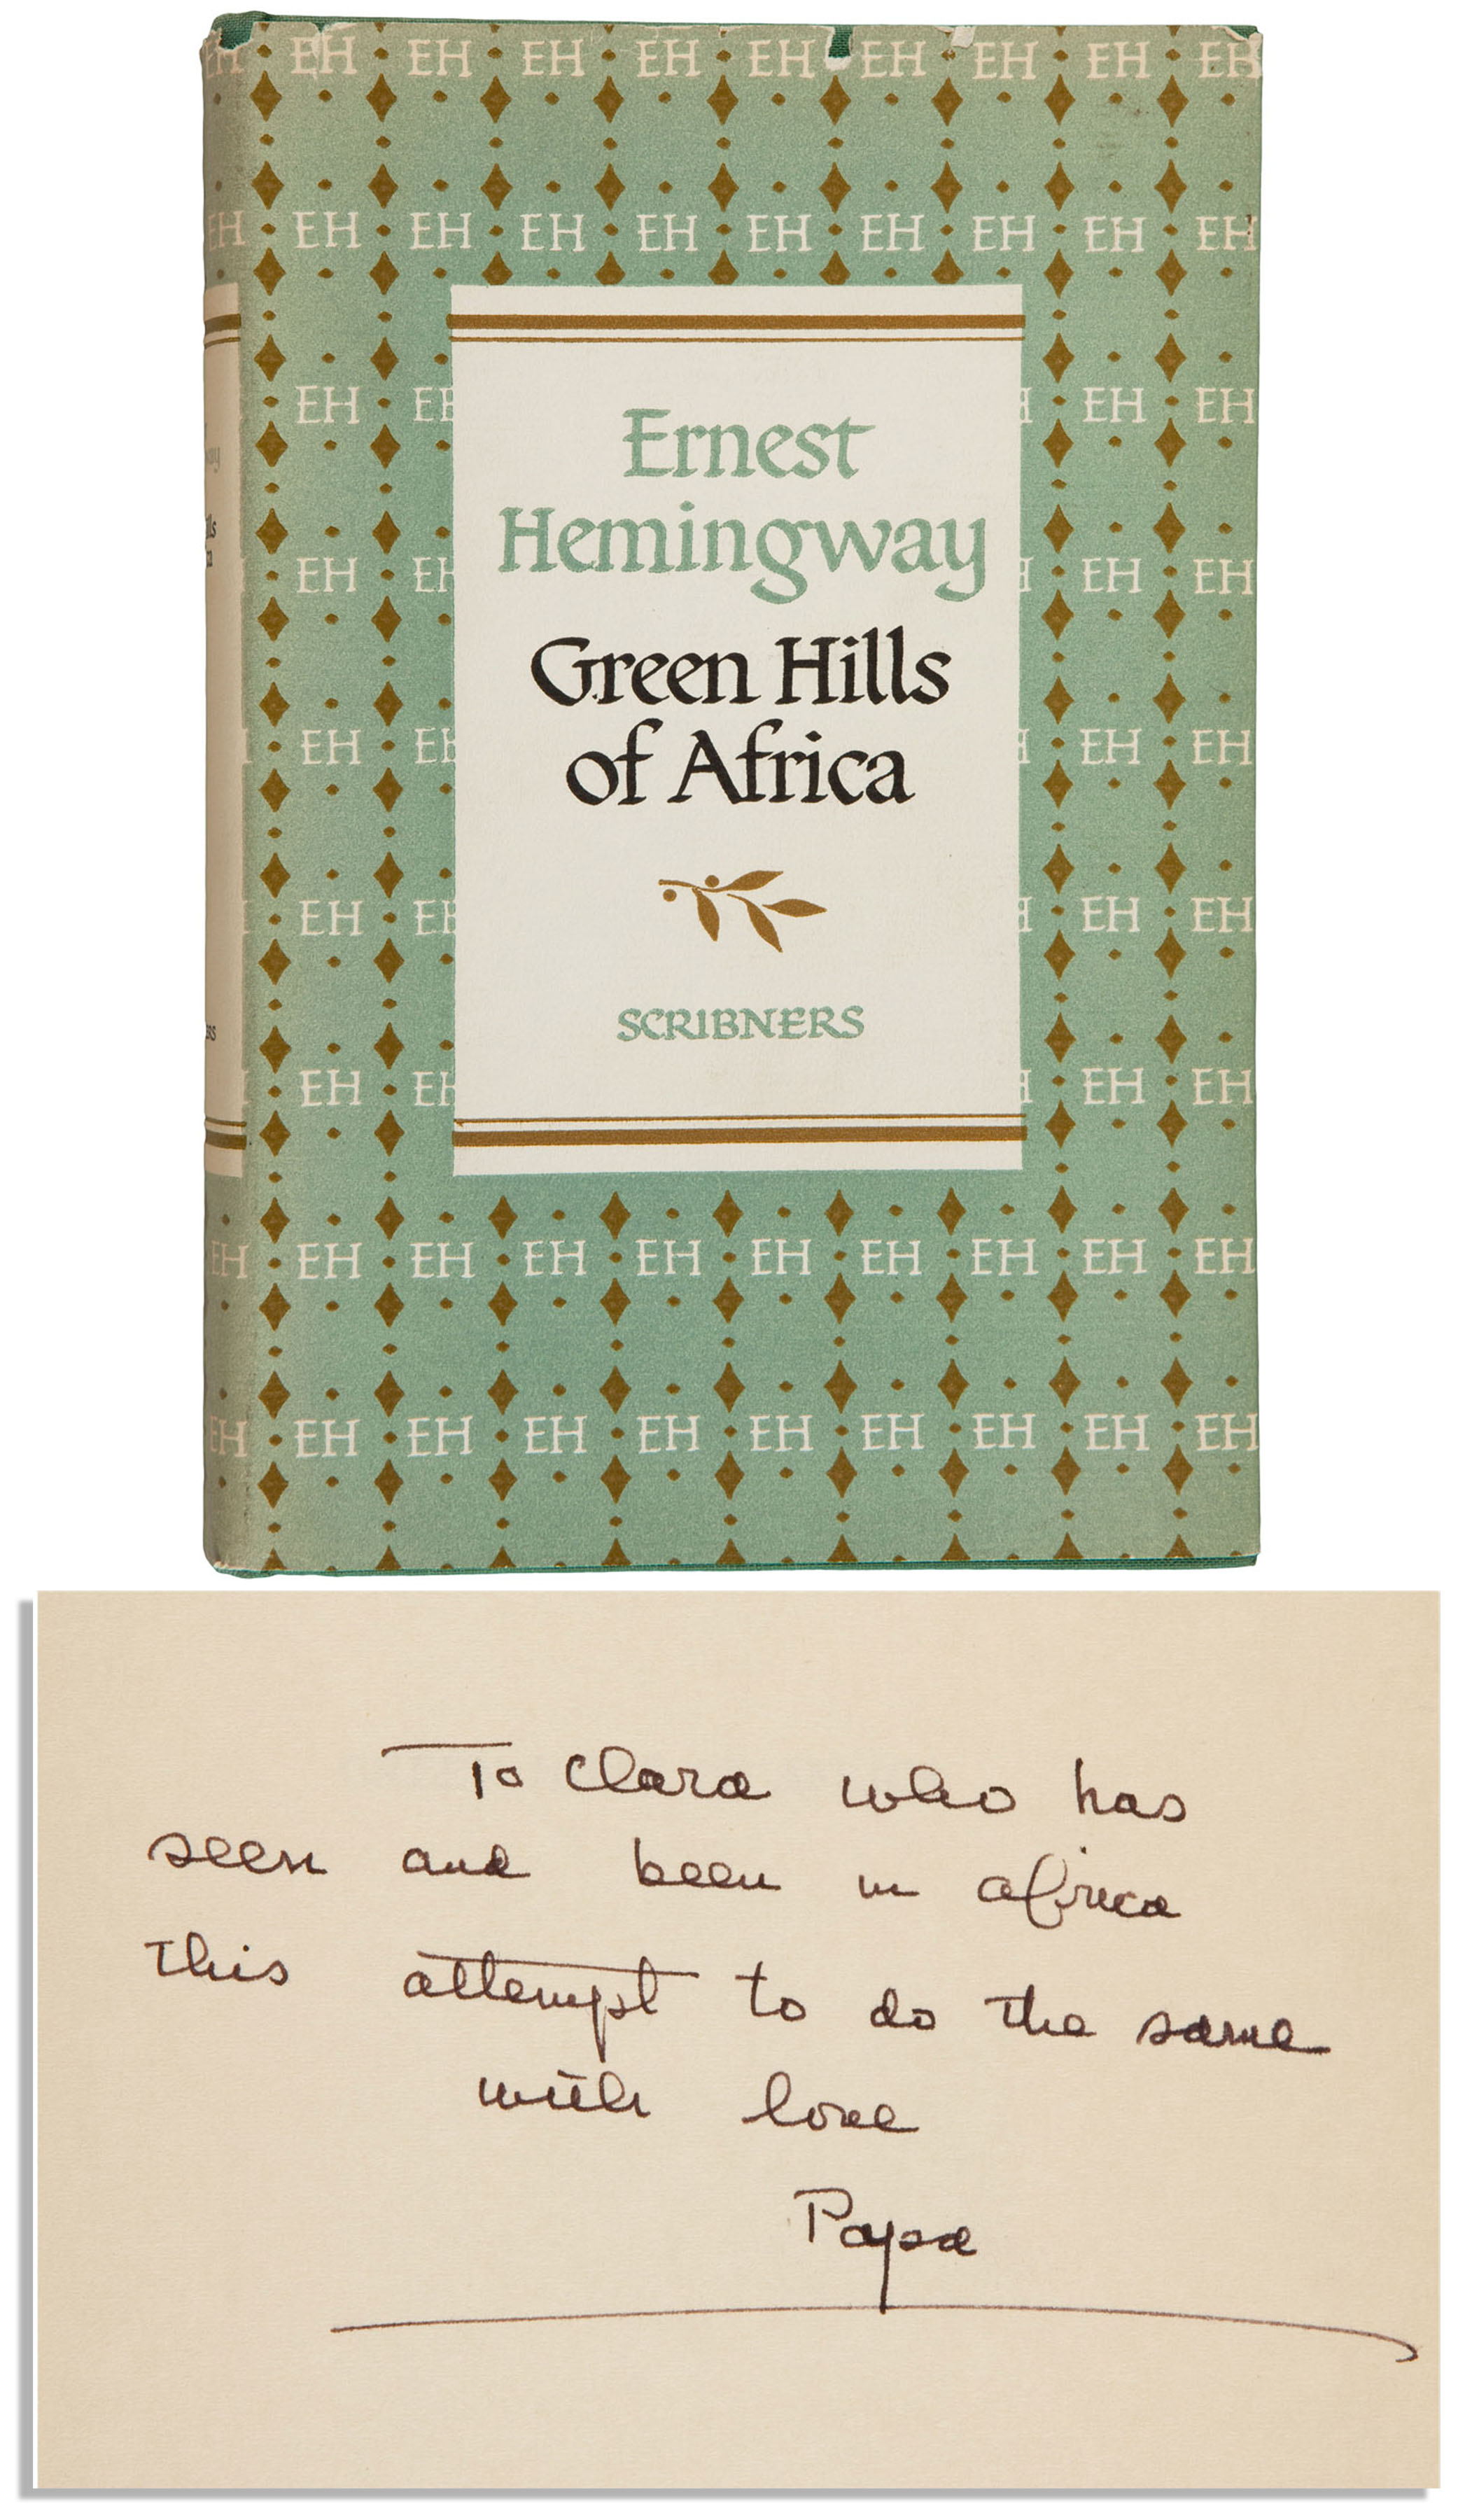 Ernest Hemingway First Edition Scarce ''Green Hills of Africa'' Signed and Inscribed by Ernest Hemingway to His Friend, Clara Spiegel